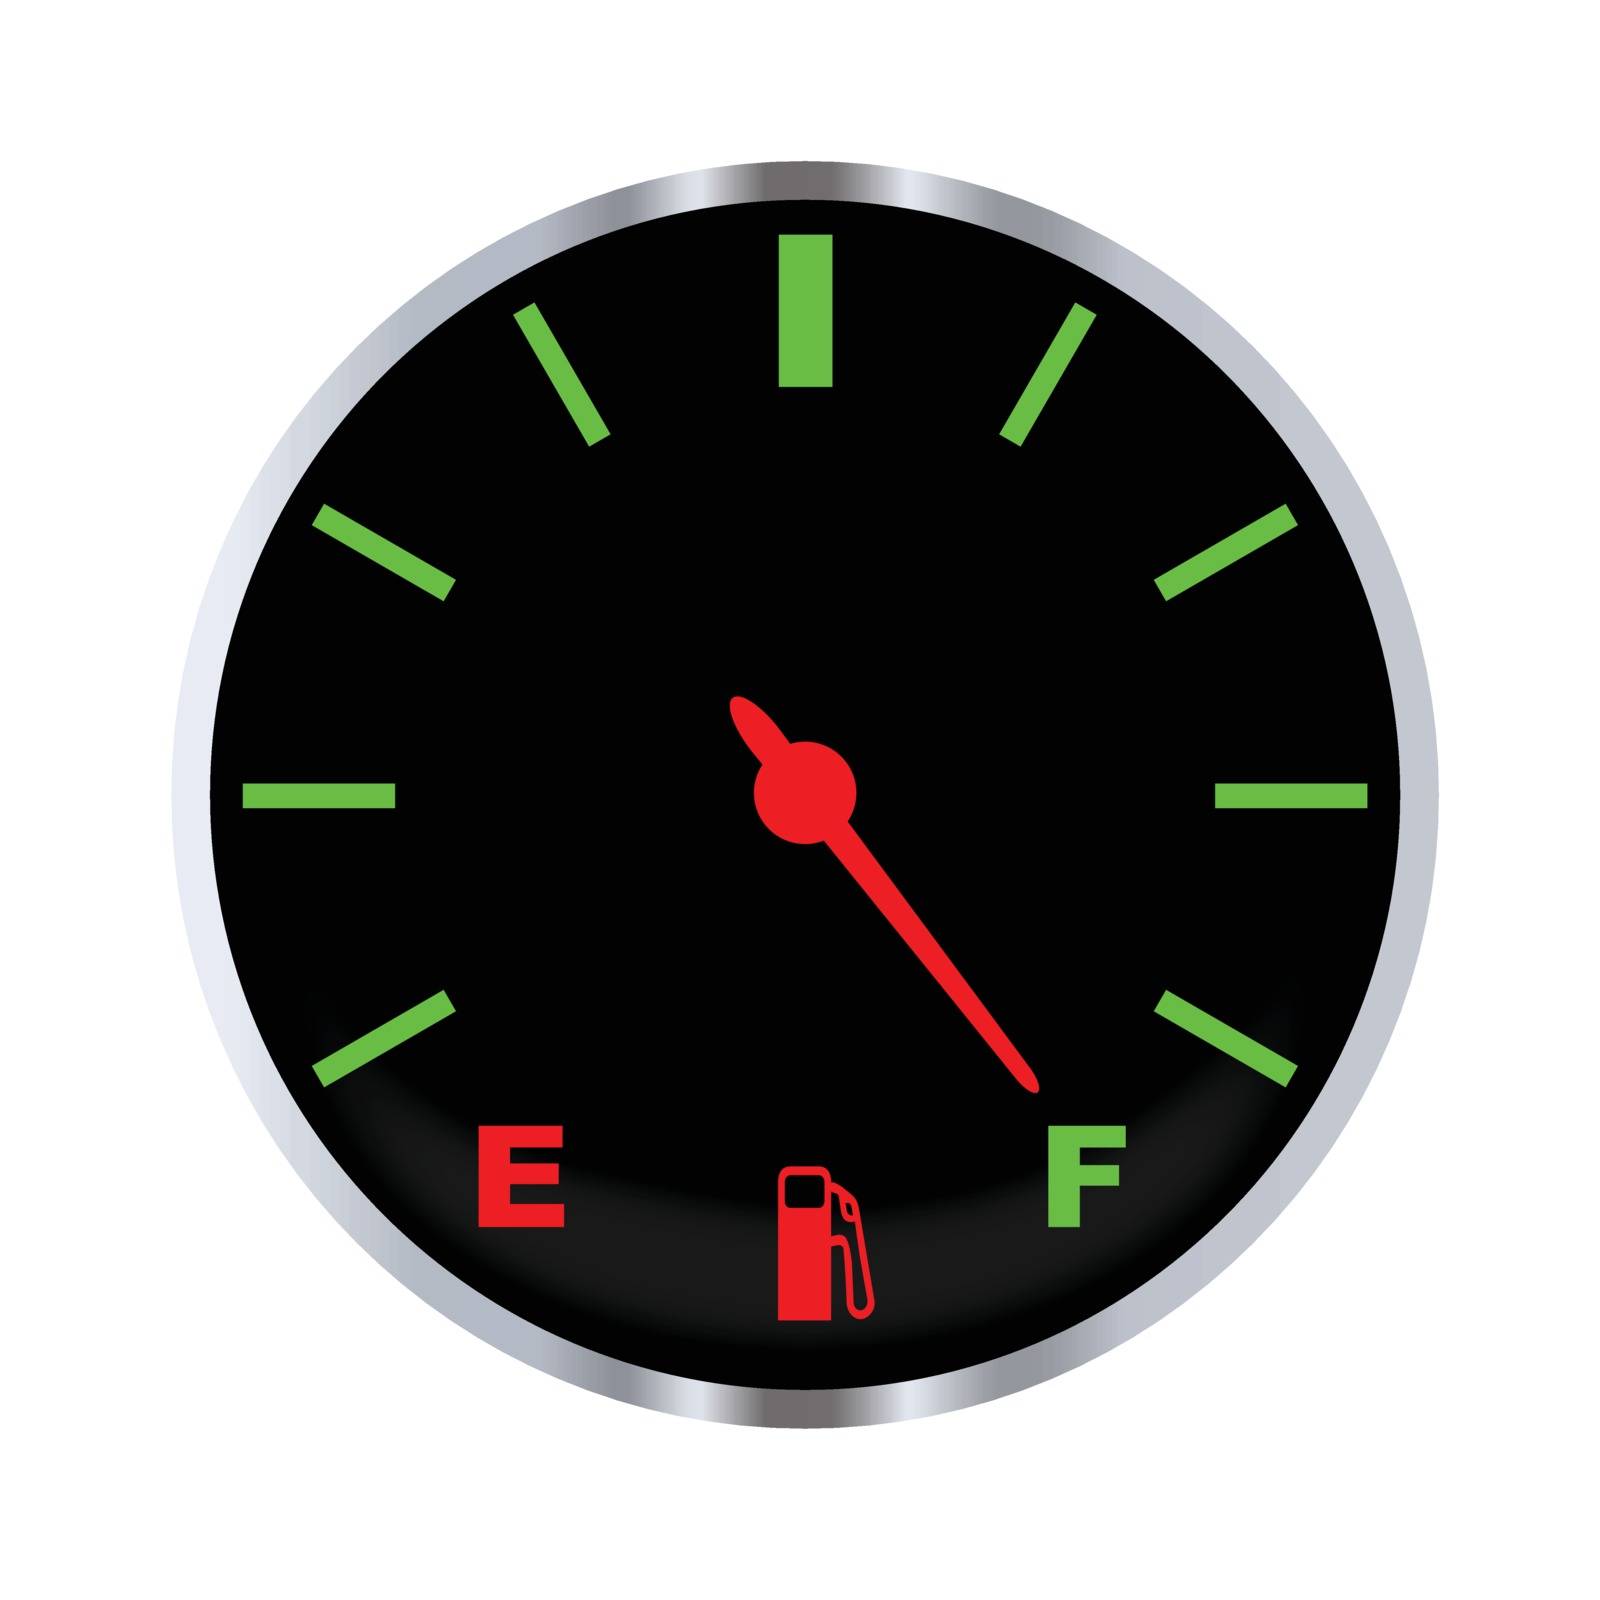 A typical vehicle fuel gauge at the full mark